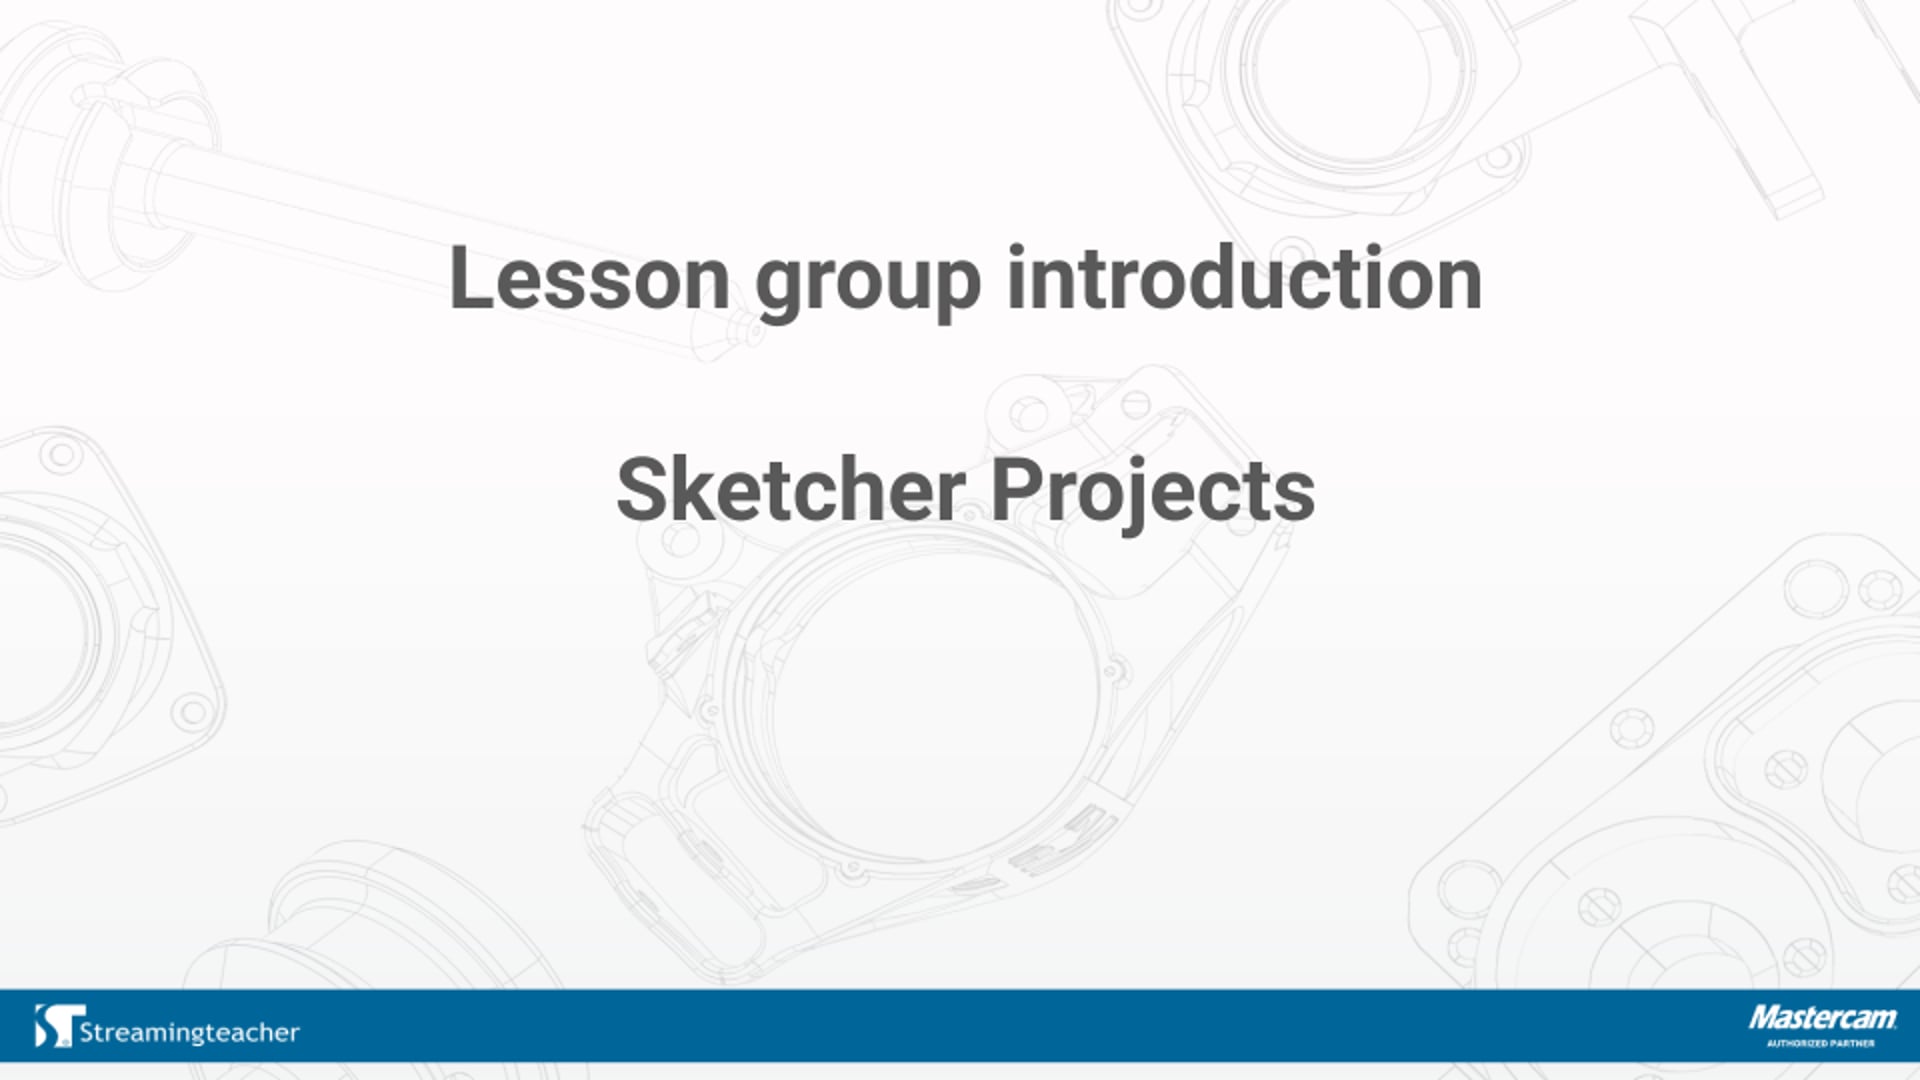 Sketcher Projects